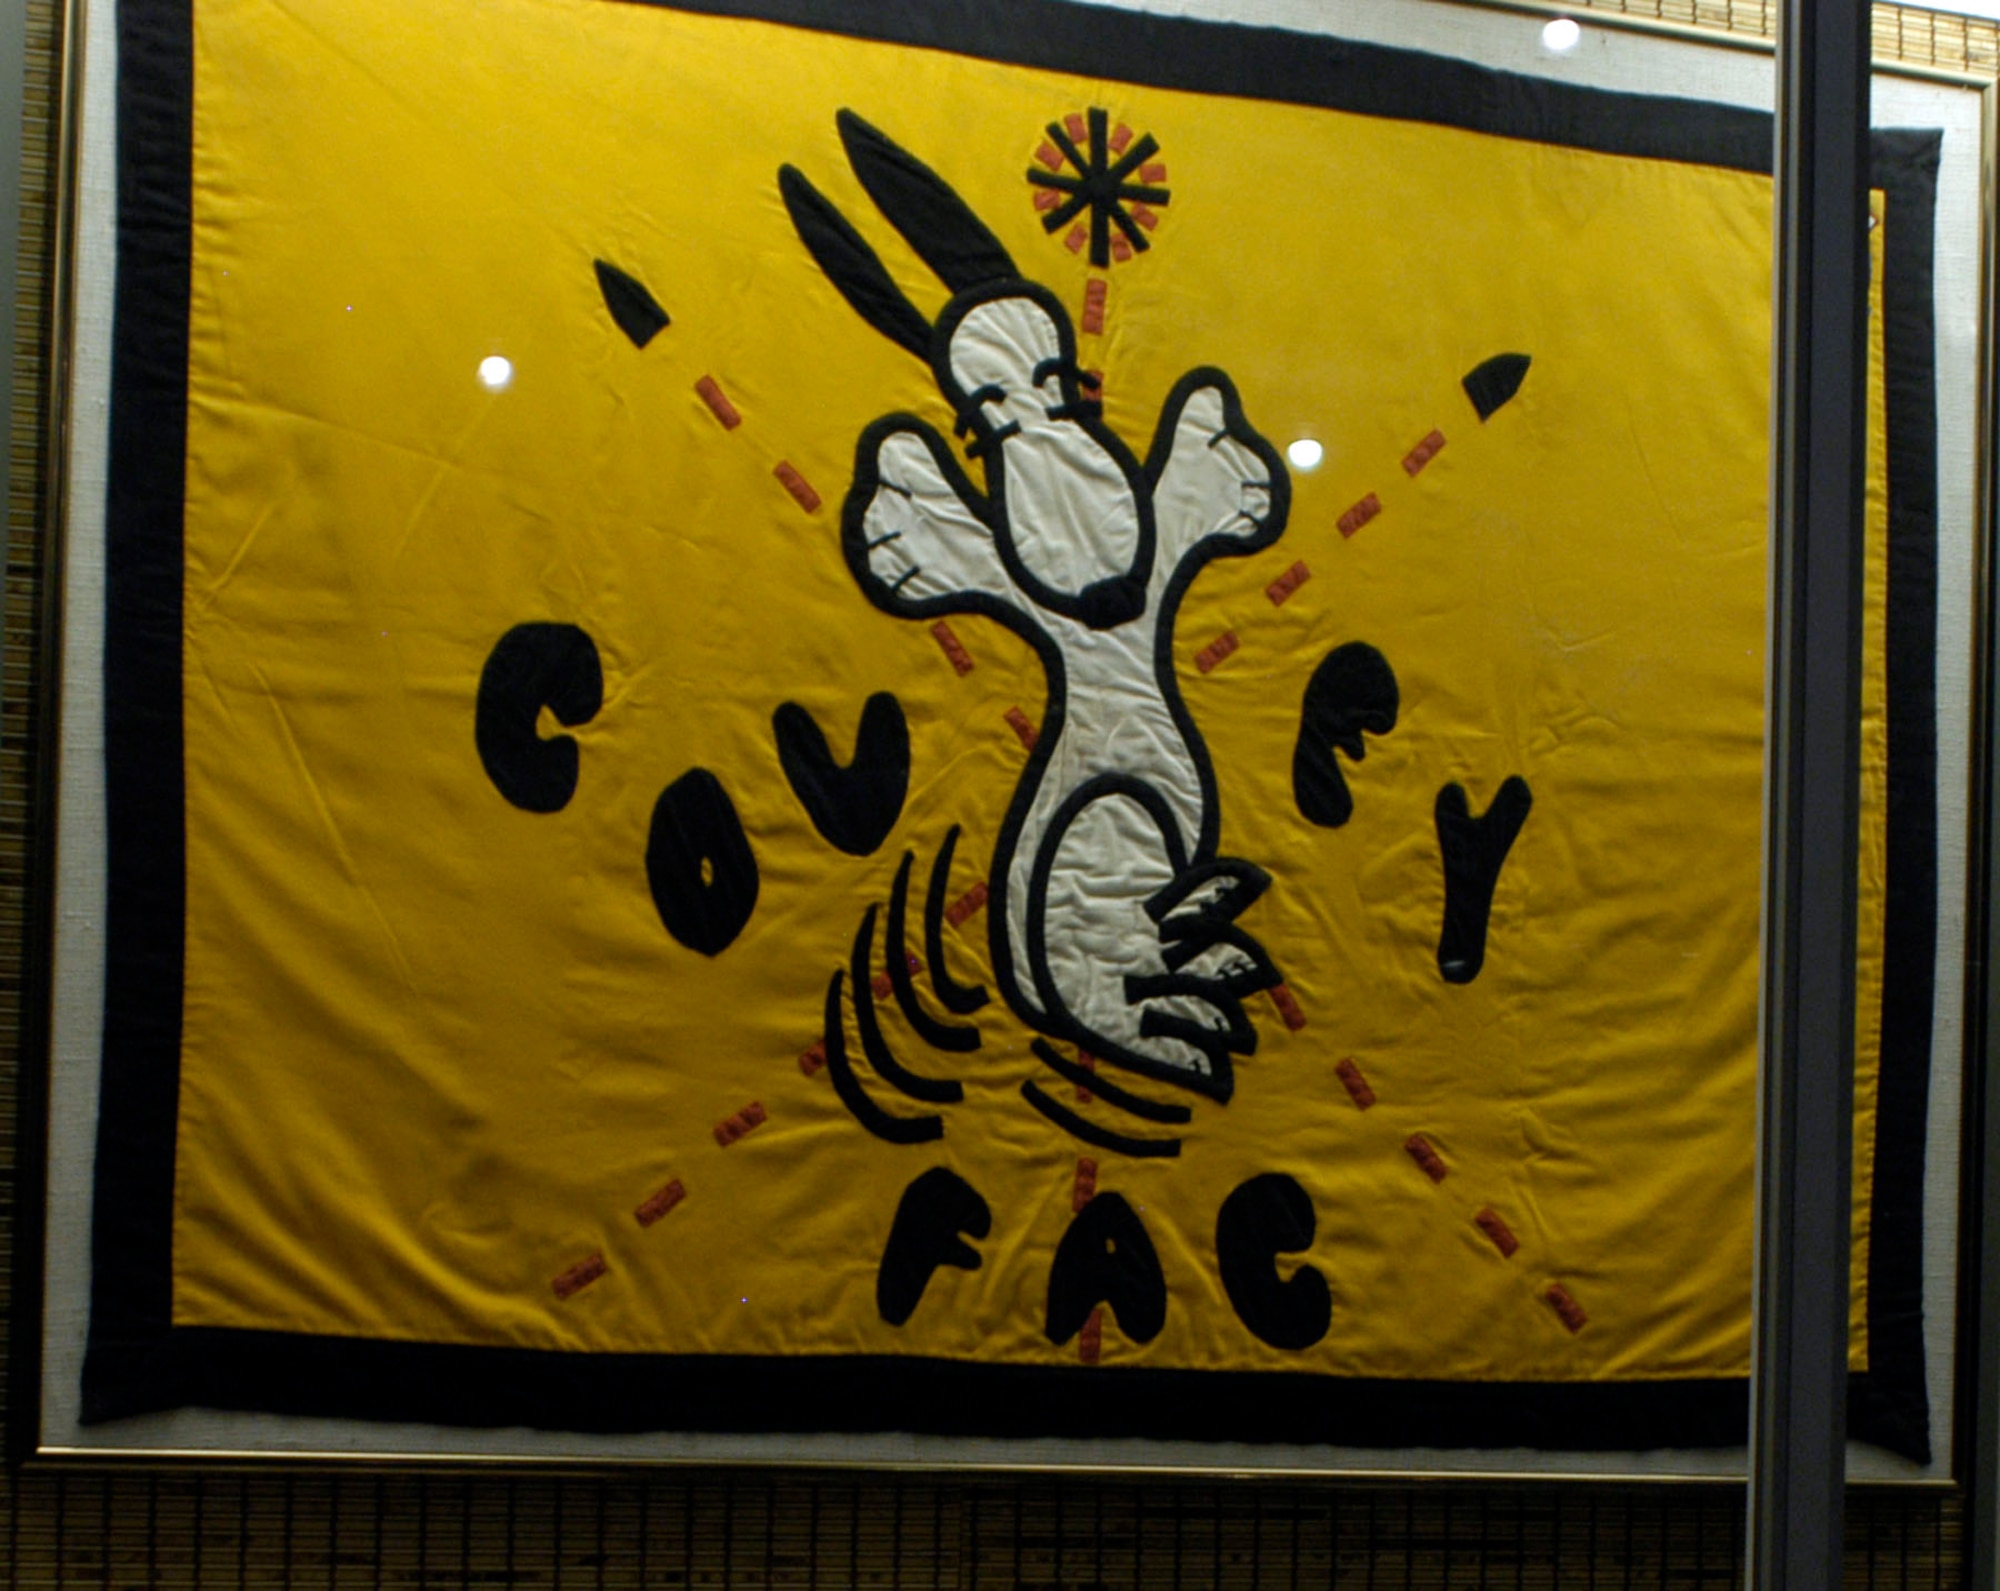 DAYTON, Ohio - Just as Airmen have done since World War I, the FACs in Southeast Asia brought a part of home with them by incorporating popular cartoon characters into nose art, uniform patches, and other military items. This unofficial flag was used by the FACs of the 20th TASS, who flew with the call sign Covey. Made by the wife of one of the Covey FAC’s, it has the popular character “Snoopy” from Charles Schulz’s comic strip Peanuts. The flag is on display in the A Dangerous Business: Forward Air Control exhibit in the Southeast Asia War Gallery at the National Museum of the U.S. Air Force. (U.S. Air Force photo)